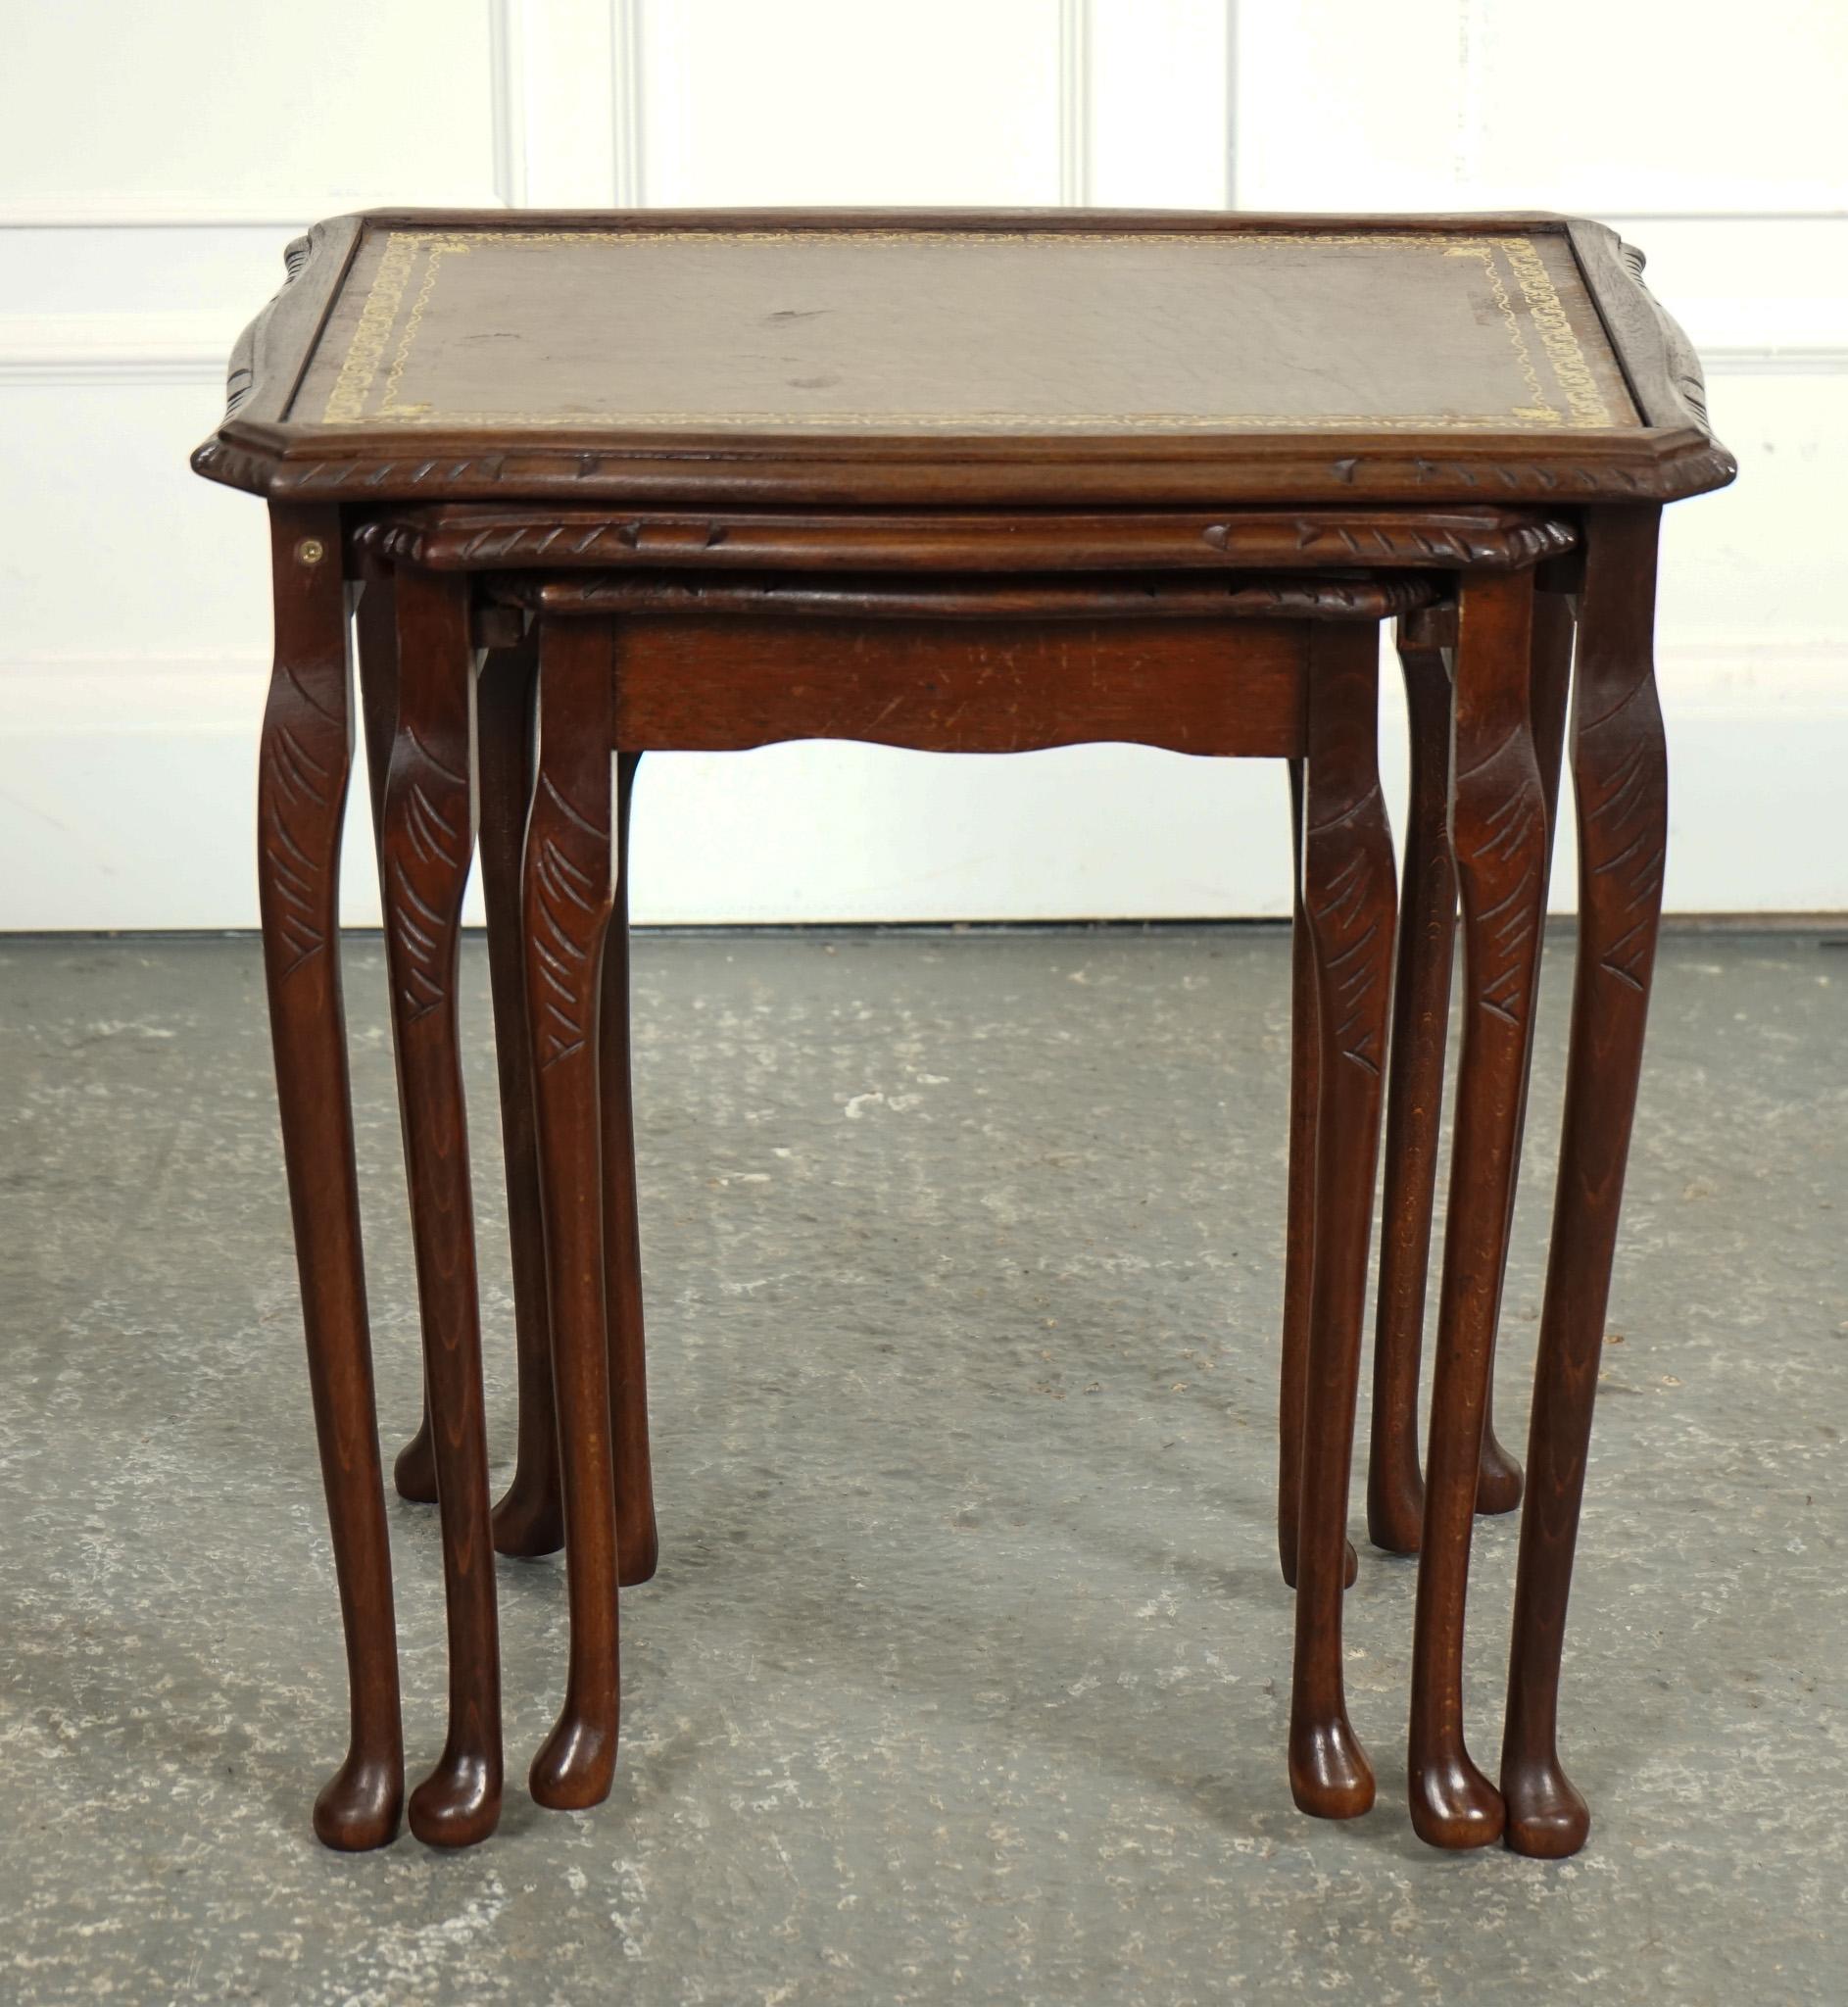 Fait main VINTAGE NEST OF TABLES QUEEN ANNE STYLE LEGS WiTH BROWN EMBOSsed LEATHER top en vente